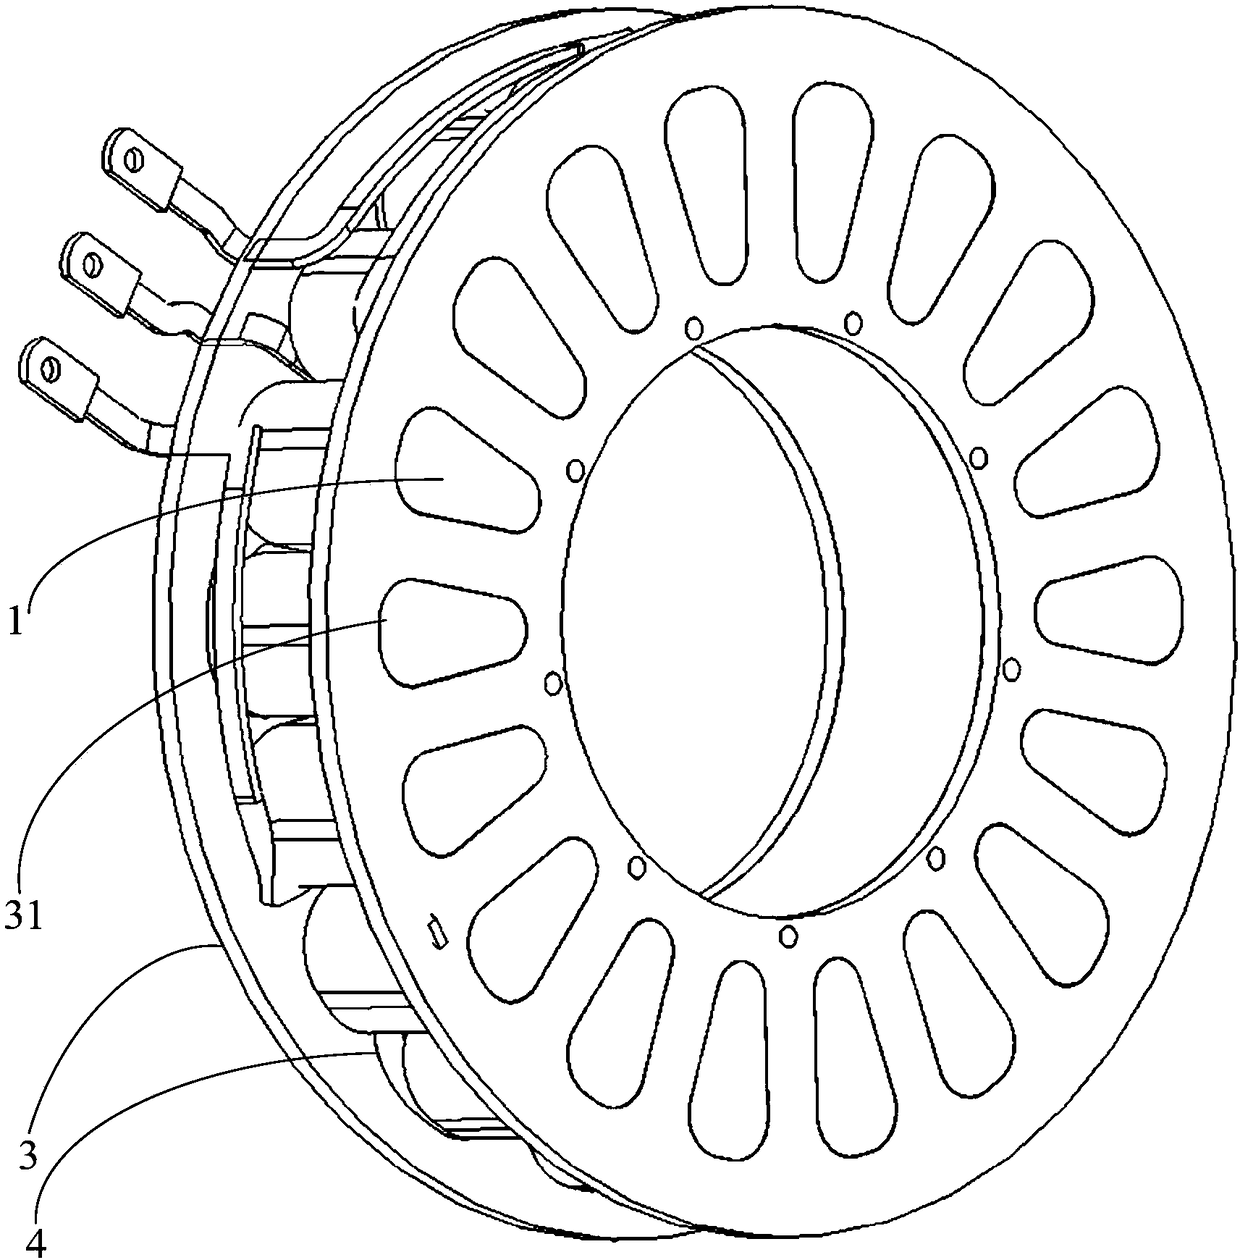 Stator iron core winding unit, stator assembly of disc type motor and disc type motor